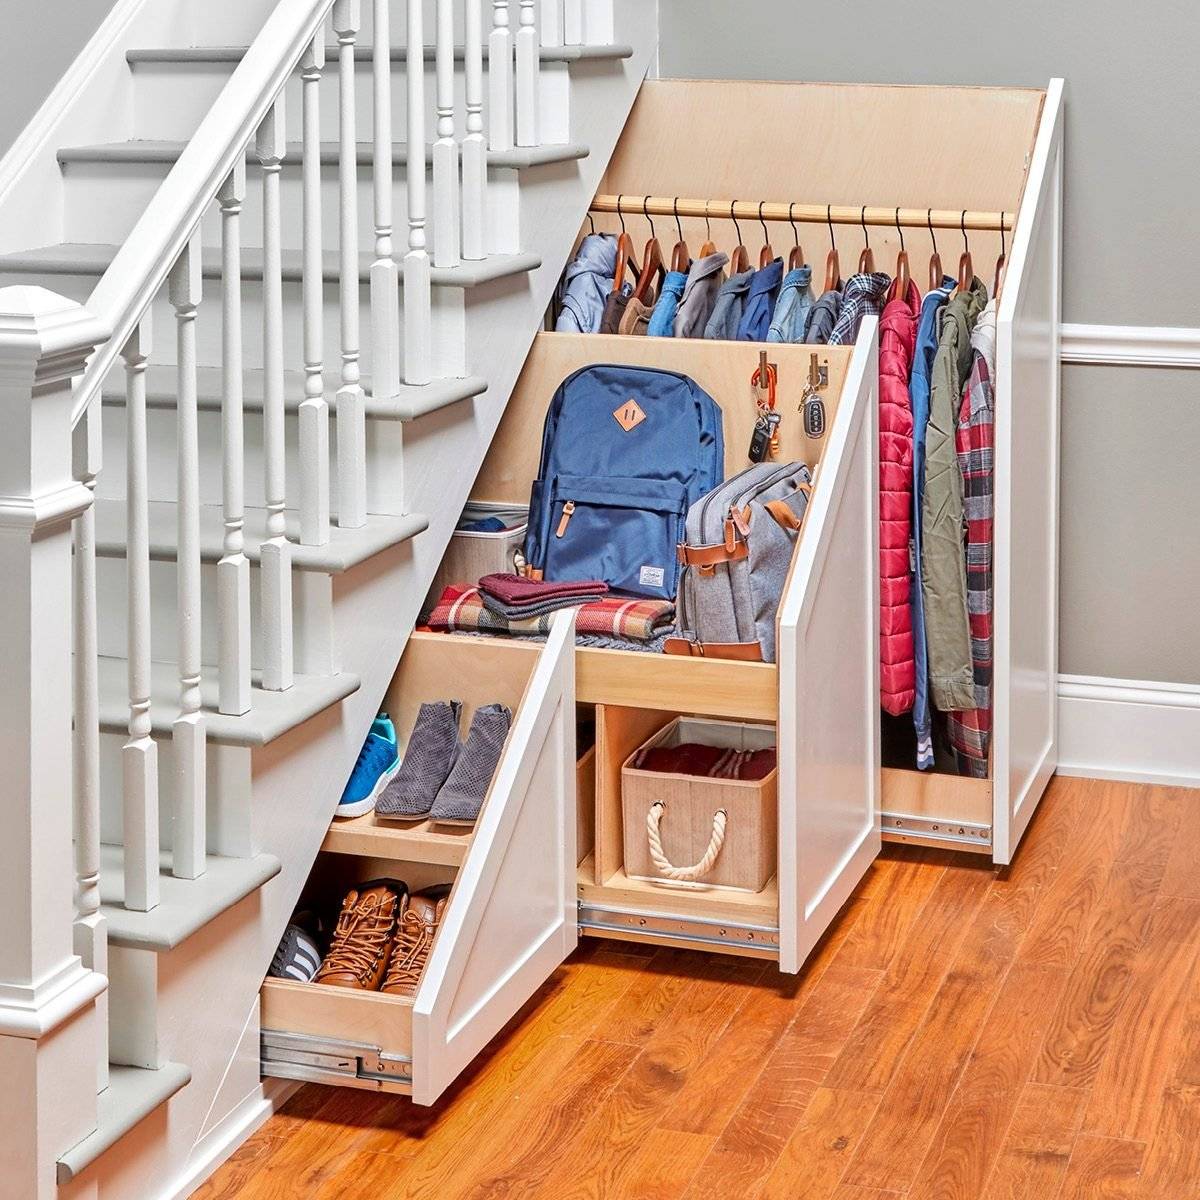 Smart clothes storage (from Family Handyman)